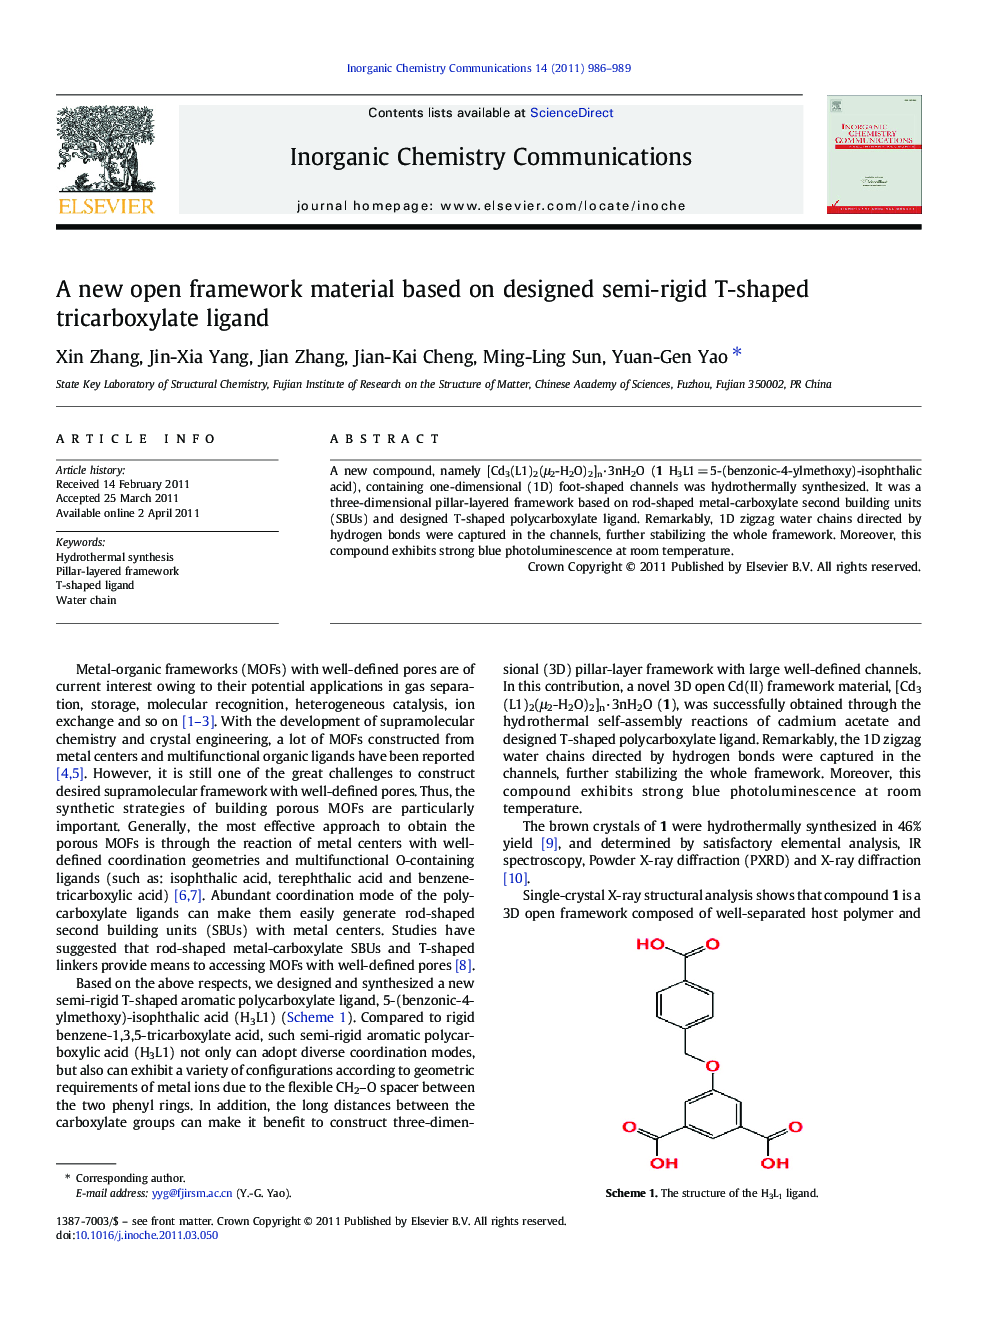 A new open framework material based on designed semi-rigid T-shaped tricarboxylate ligand